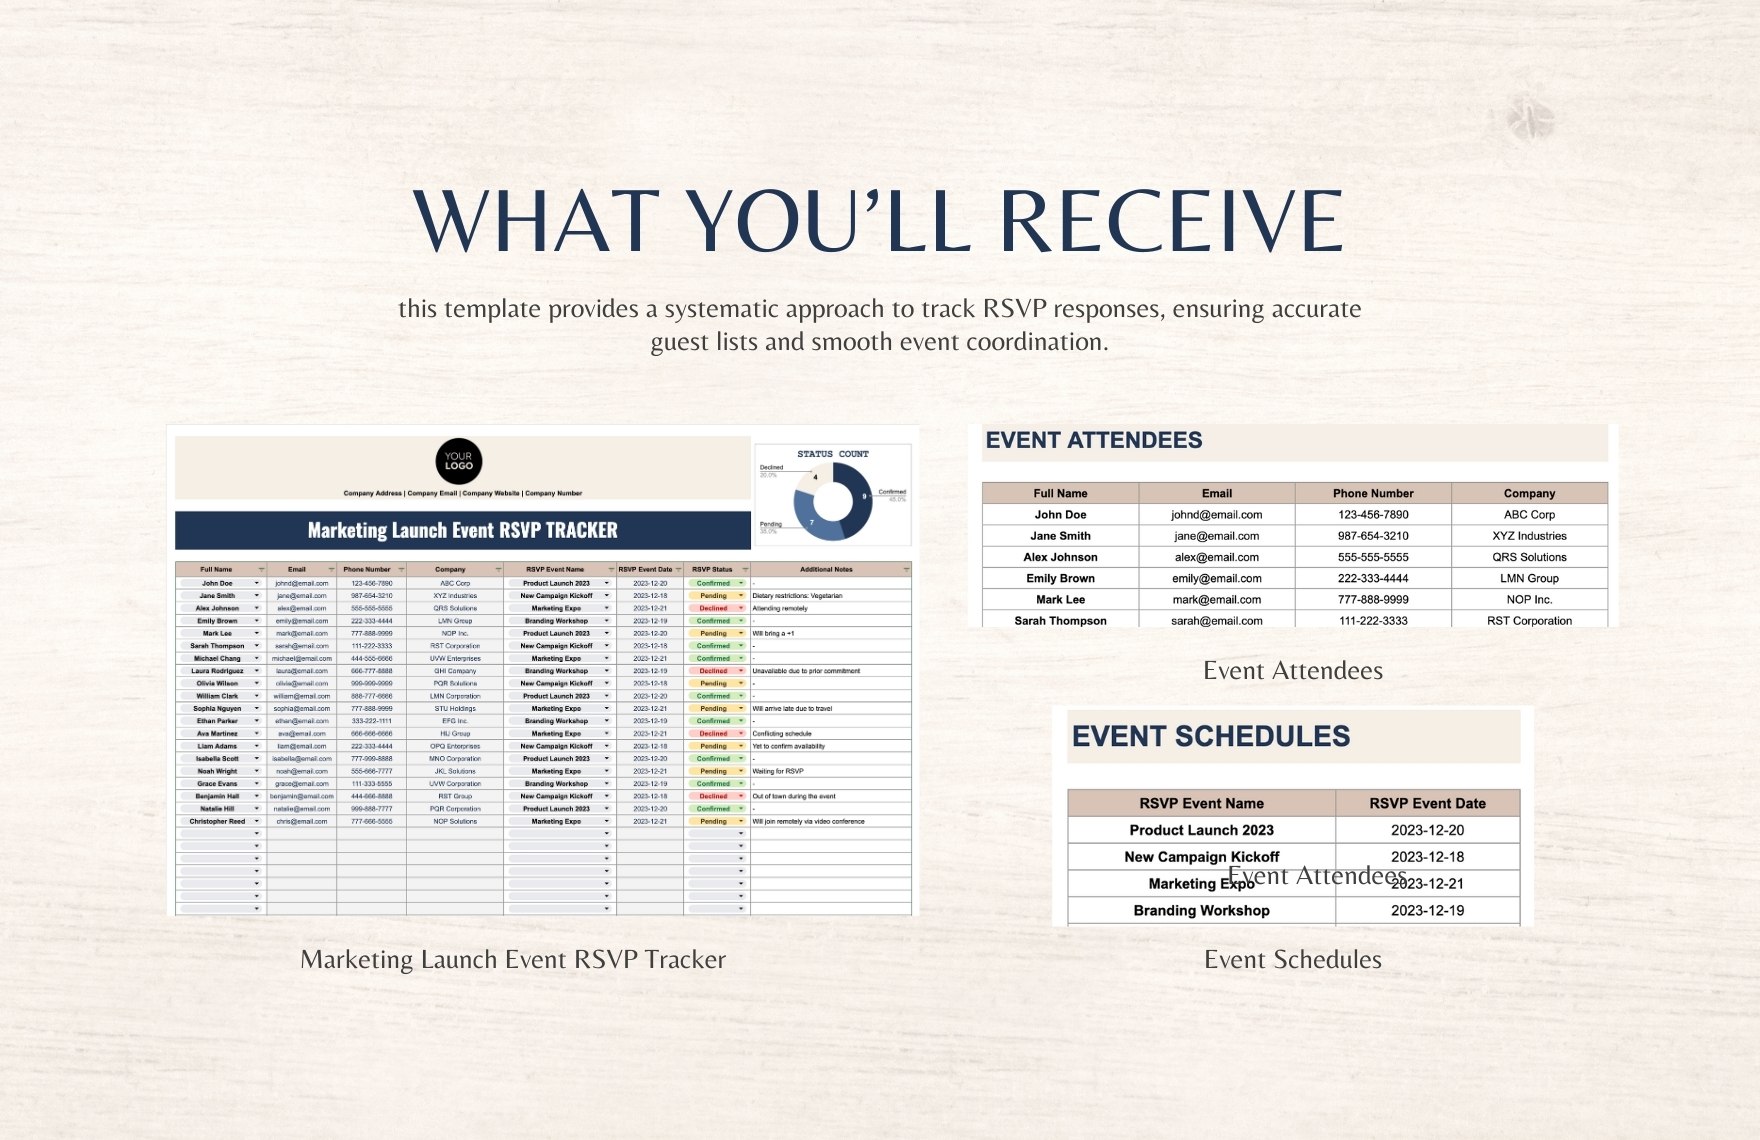 Marketing Launch Event RSVP Tracker Template